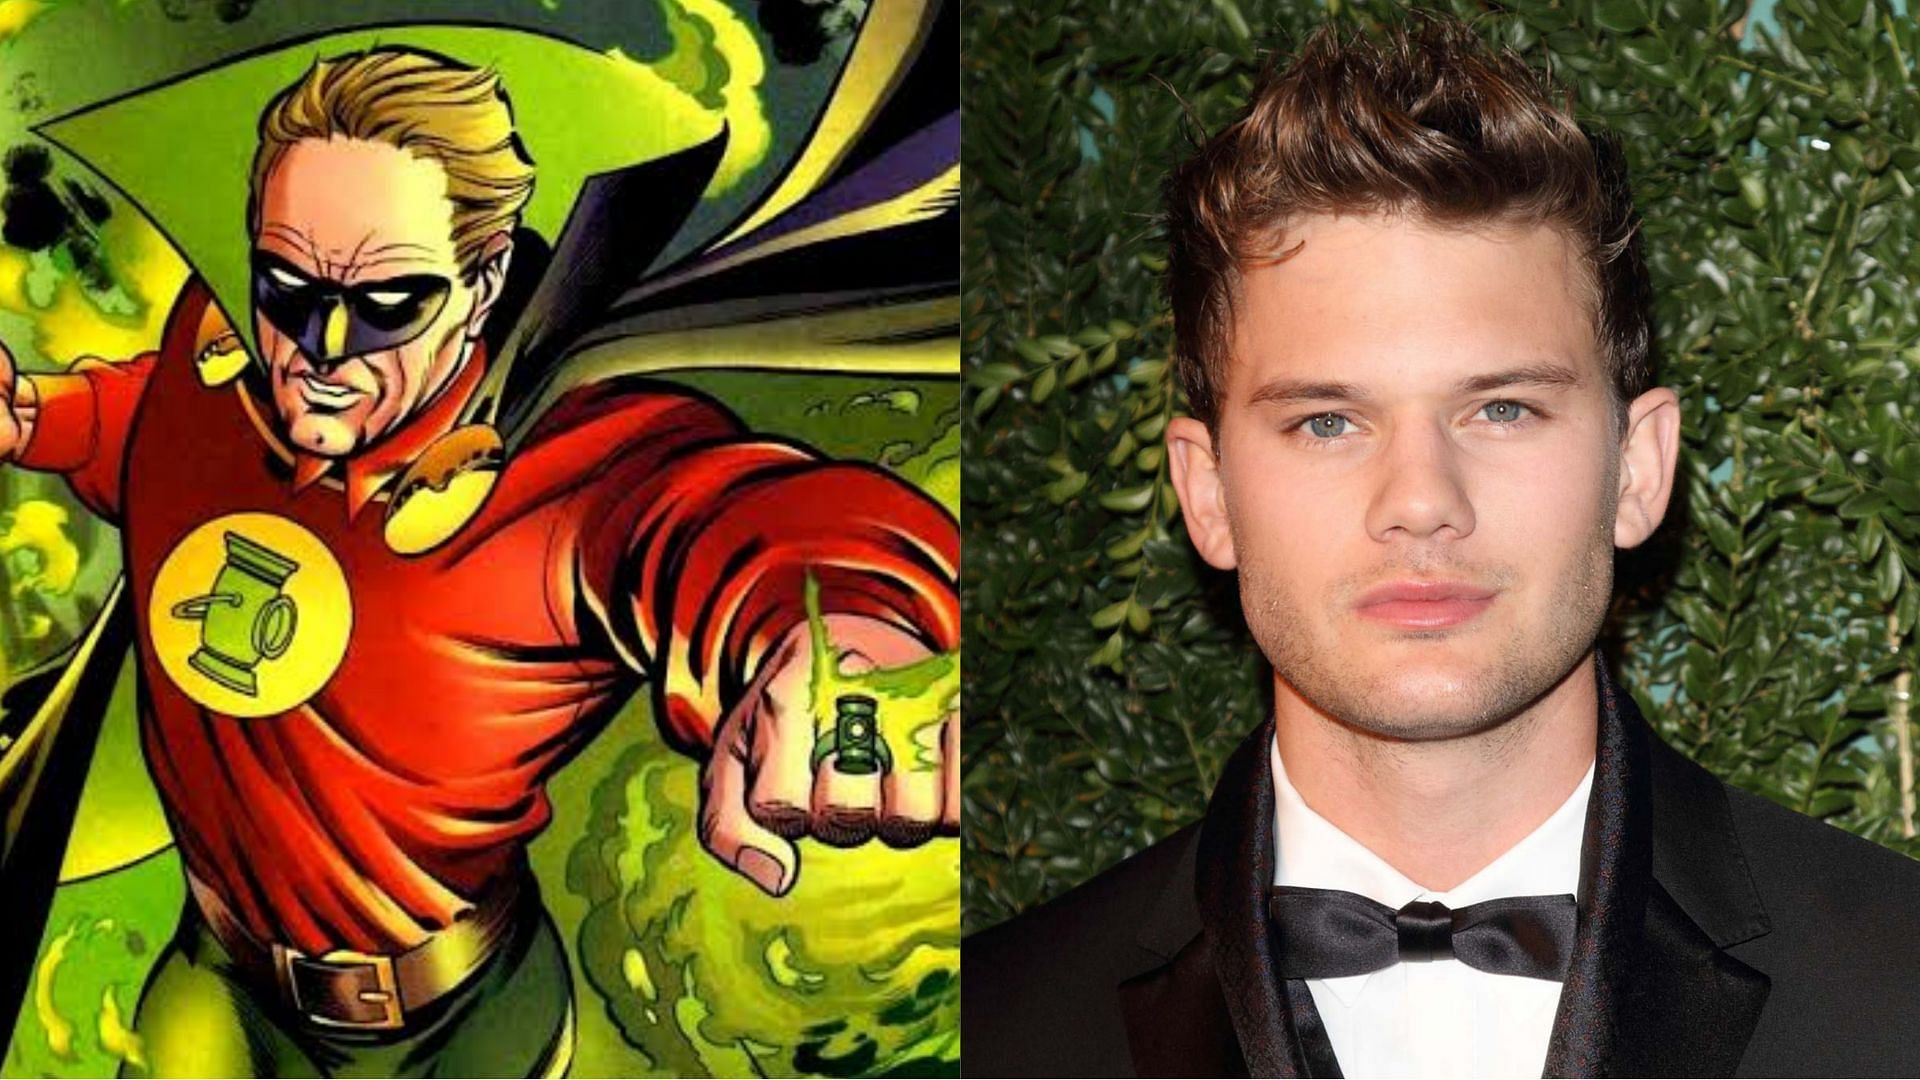 Jeremy Irvine and Alan Scott (Images via _DCCBRASIL/Twitter and DC Comics)